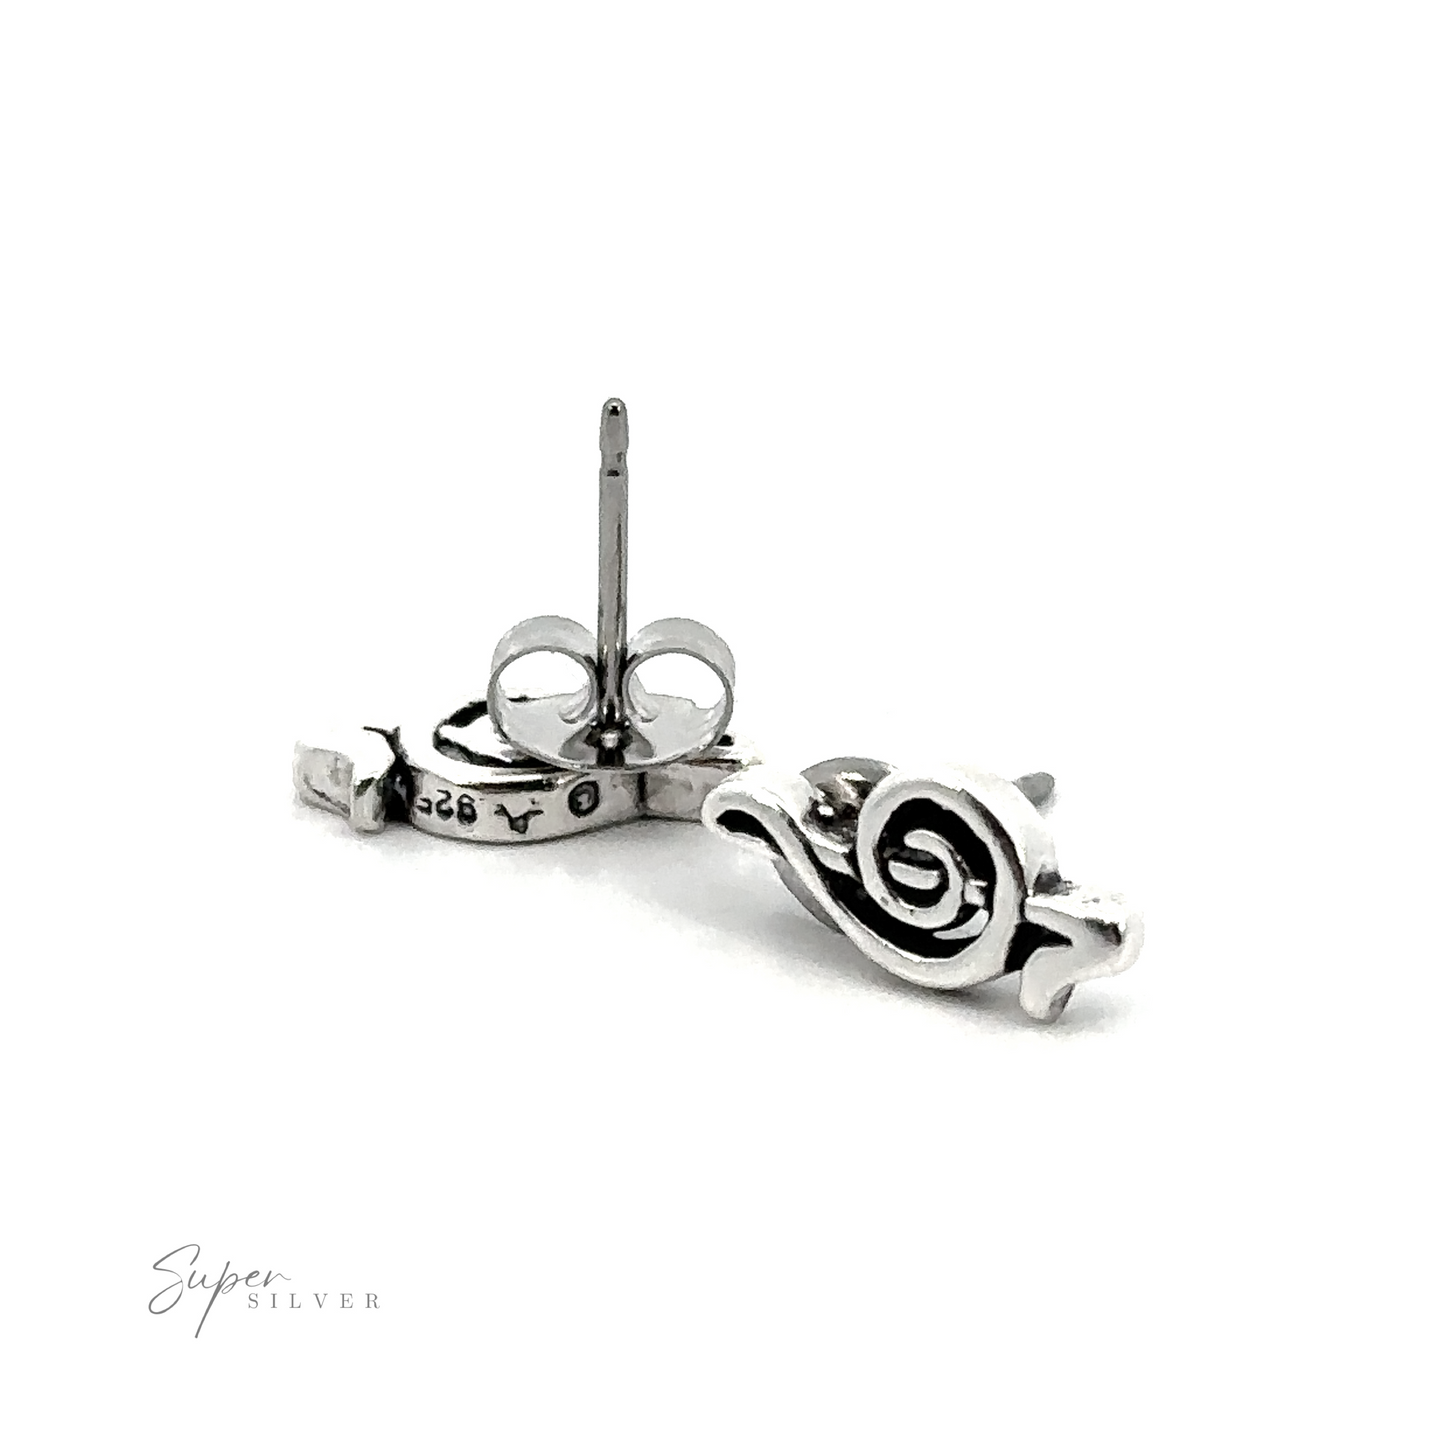 A pair of Treble Clef Studs, perfect for music lovers.